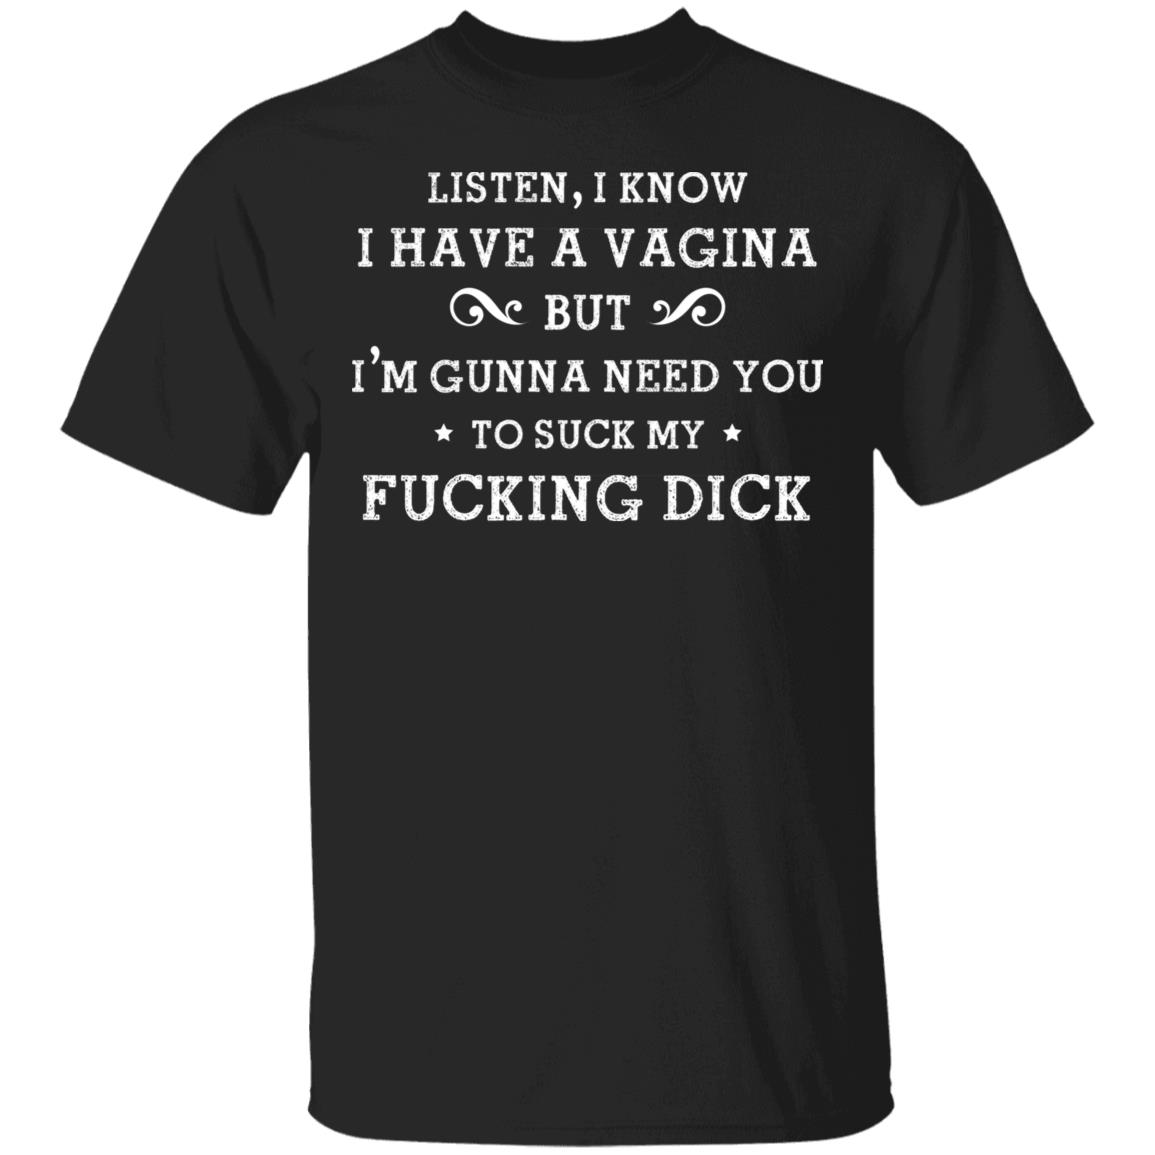 Suck My Fuck Ing Dick Shirt I Know I Have A Vagina T